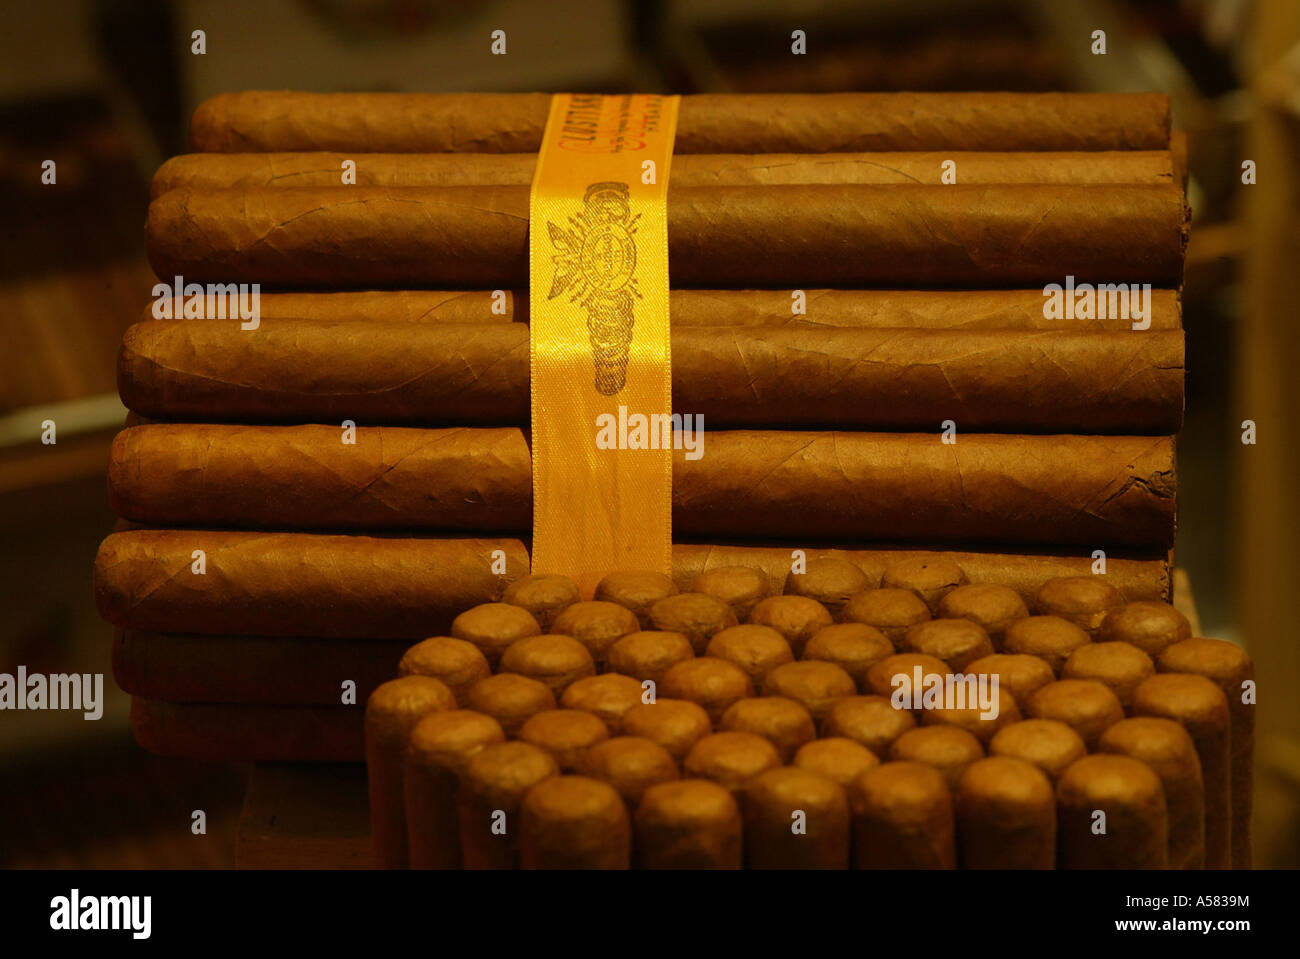 A pack of cigars Stock Photo